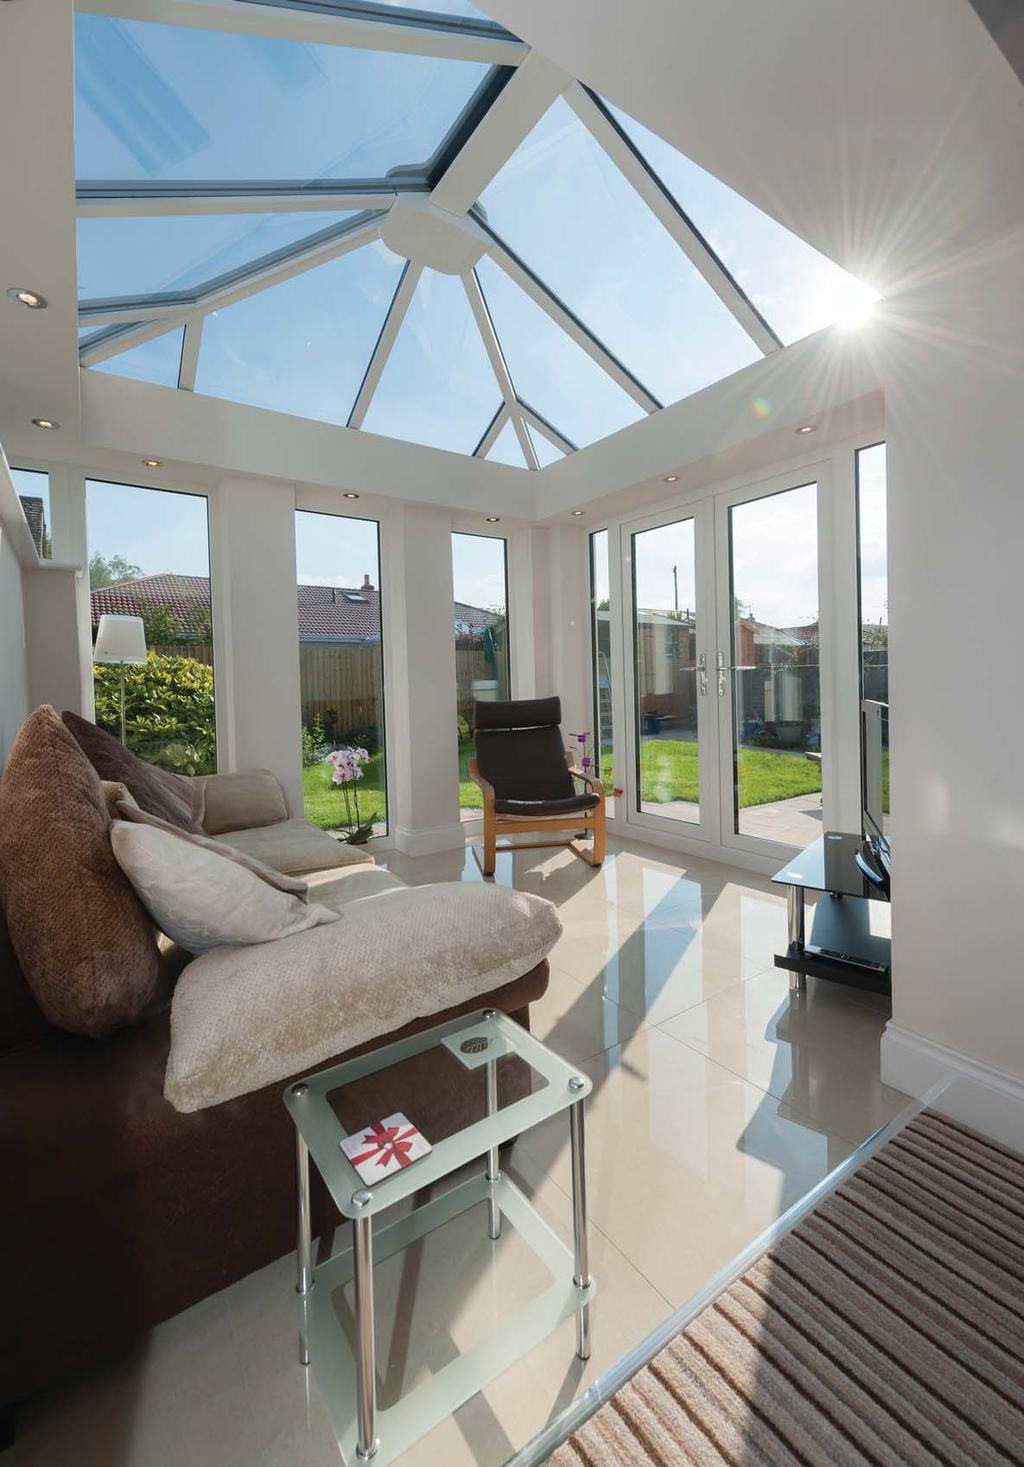 If you are looking to add more style to your lifestyle, nothing comes close to the Premium by Ultraframe.